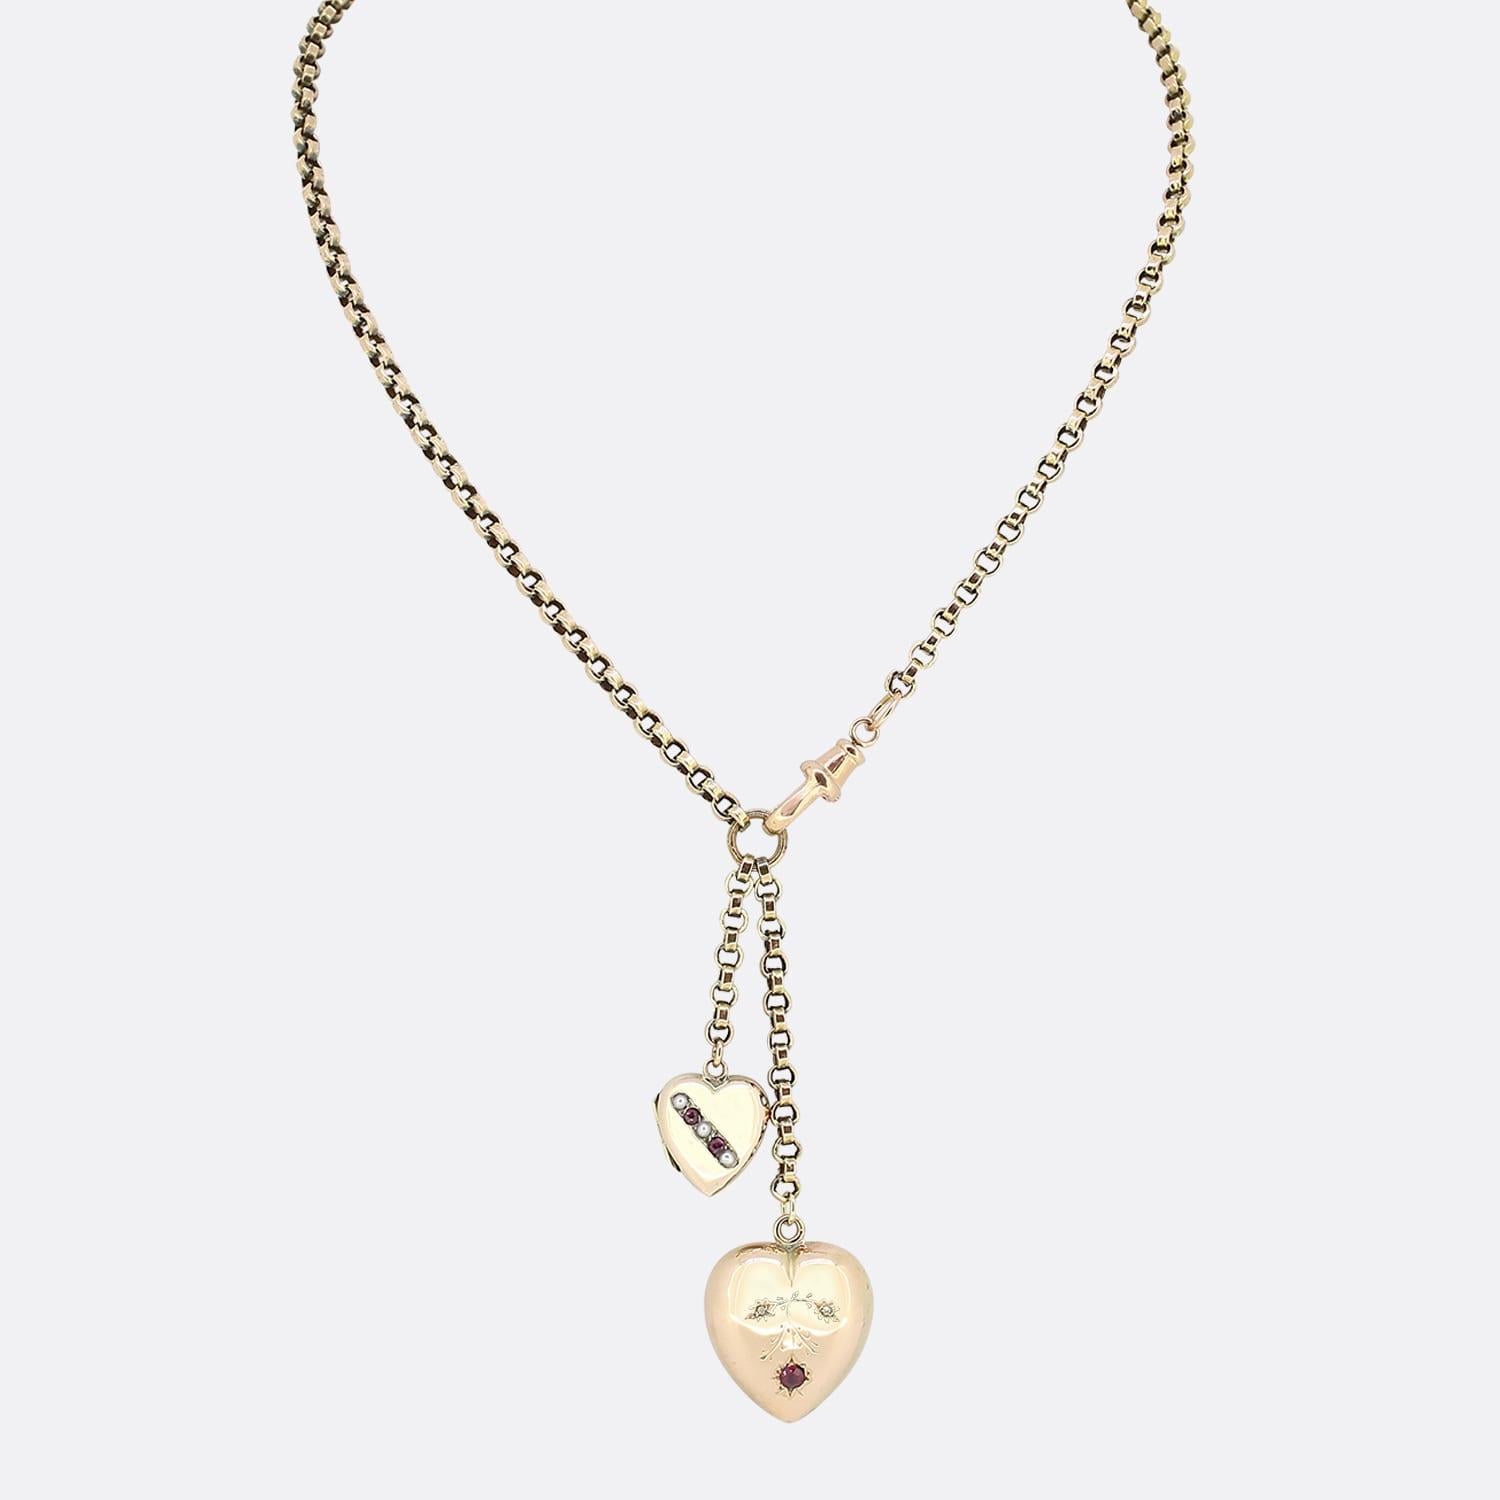 This is a vintage 9ct yellow gold belcher charm necklace. The necklace has two charms suspended from the chain including a ruby and pearl heart along with a diamond and ruby heart. The necklace is secured by an antique swivel clasp.

Condition: Used